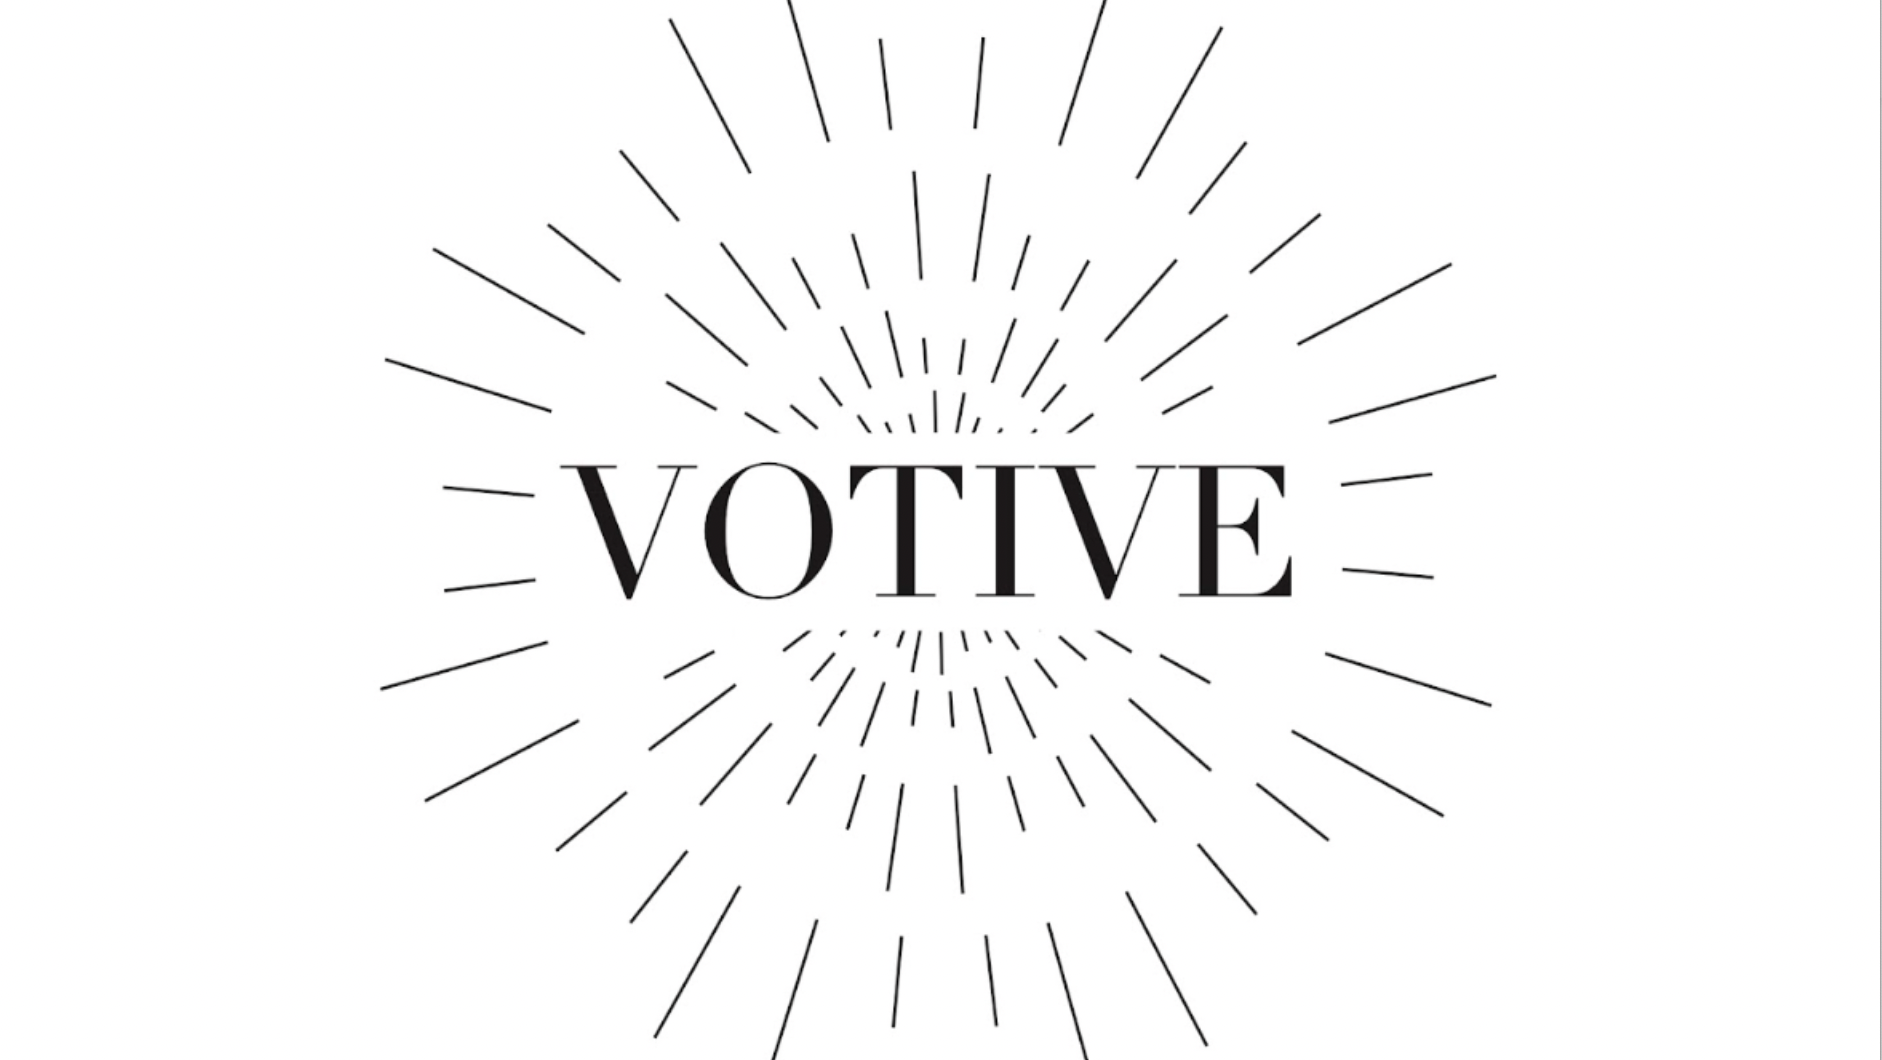 Votive curated by Antoine Schafroth